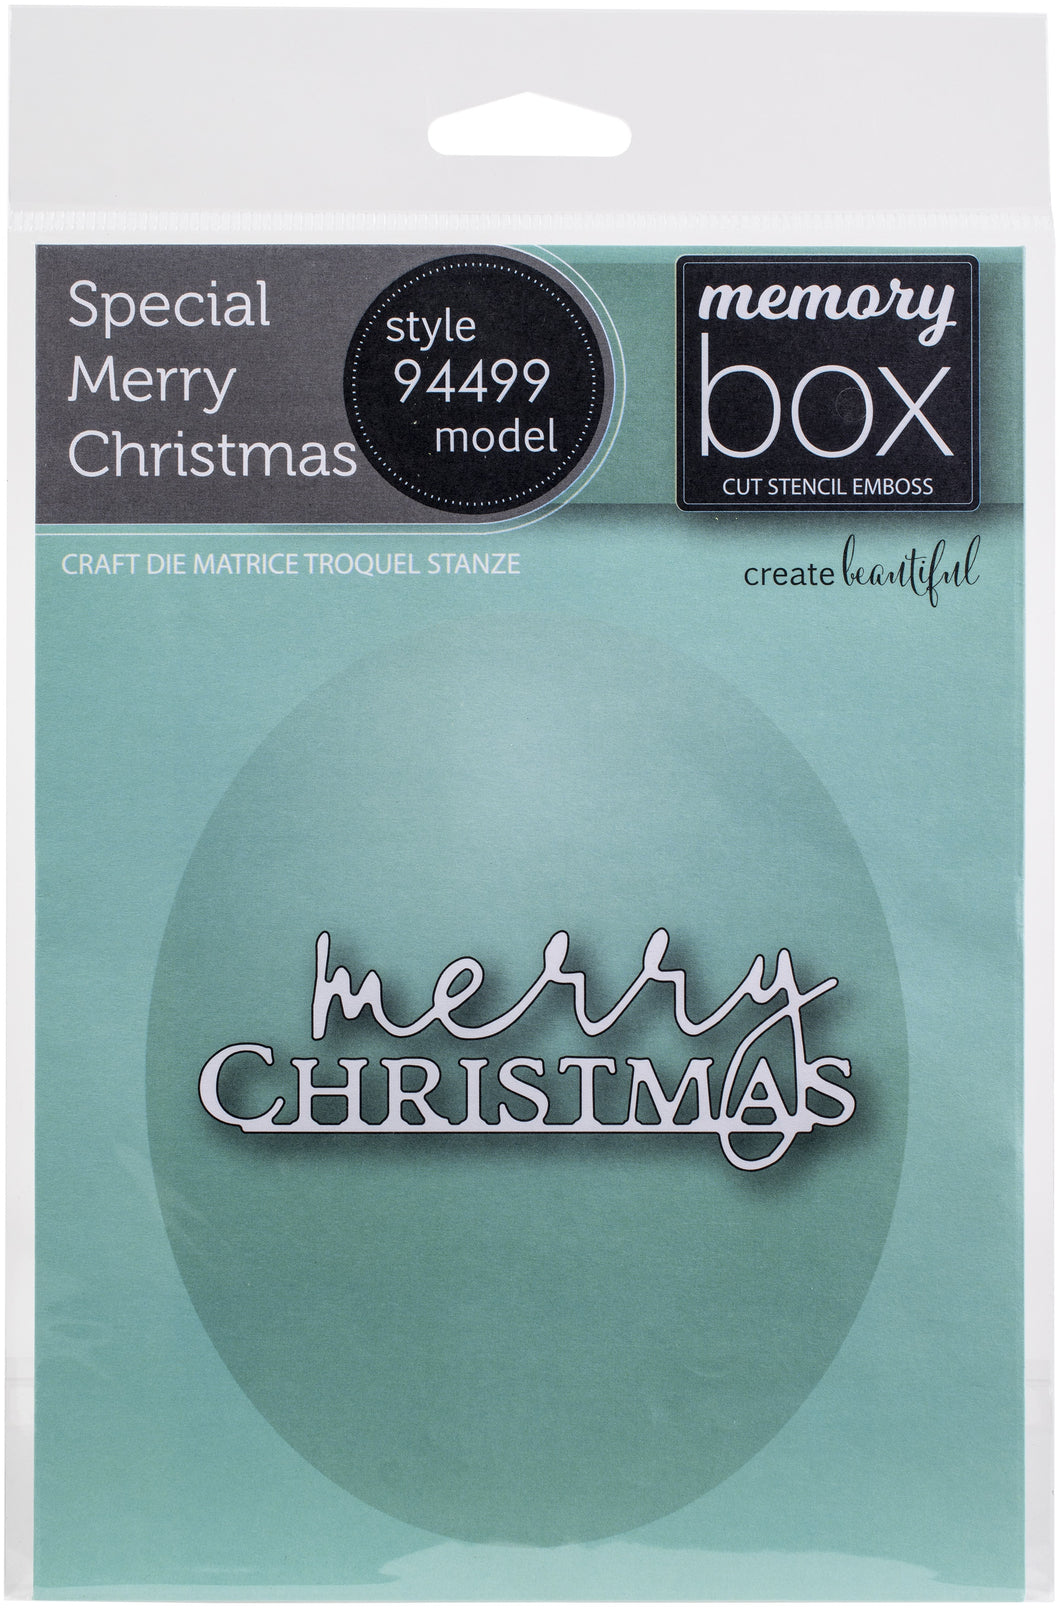 Memory Box - Special Merry Christmas Die - Style 94499